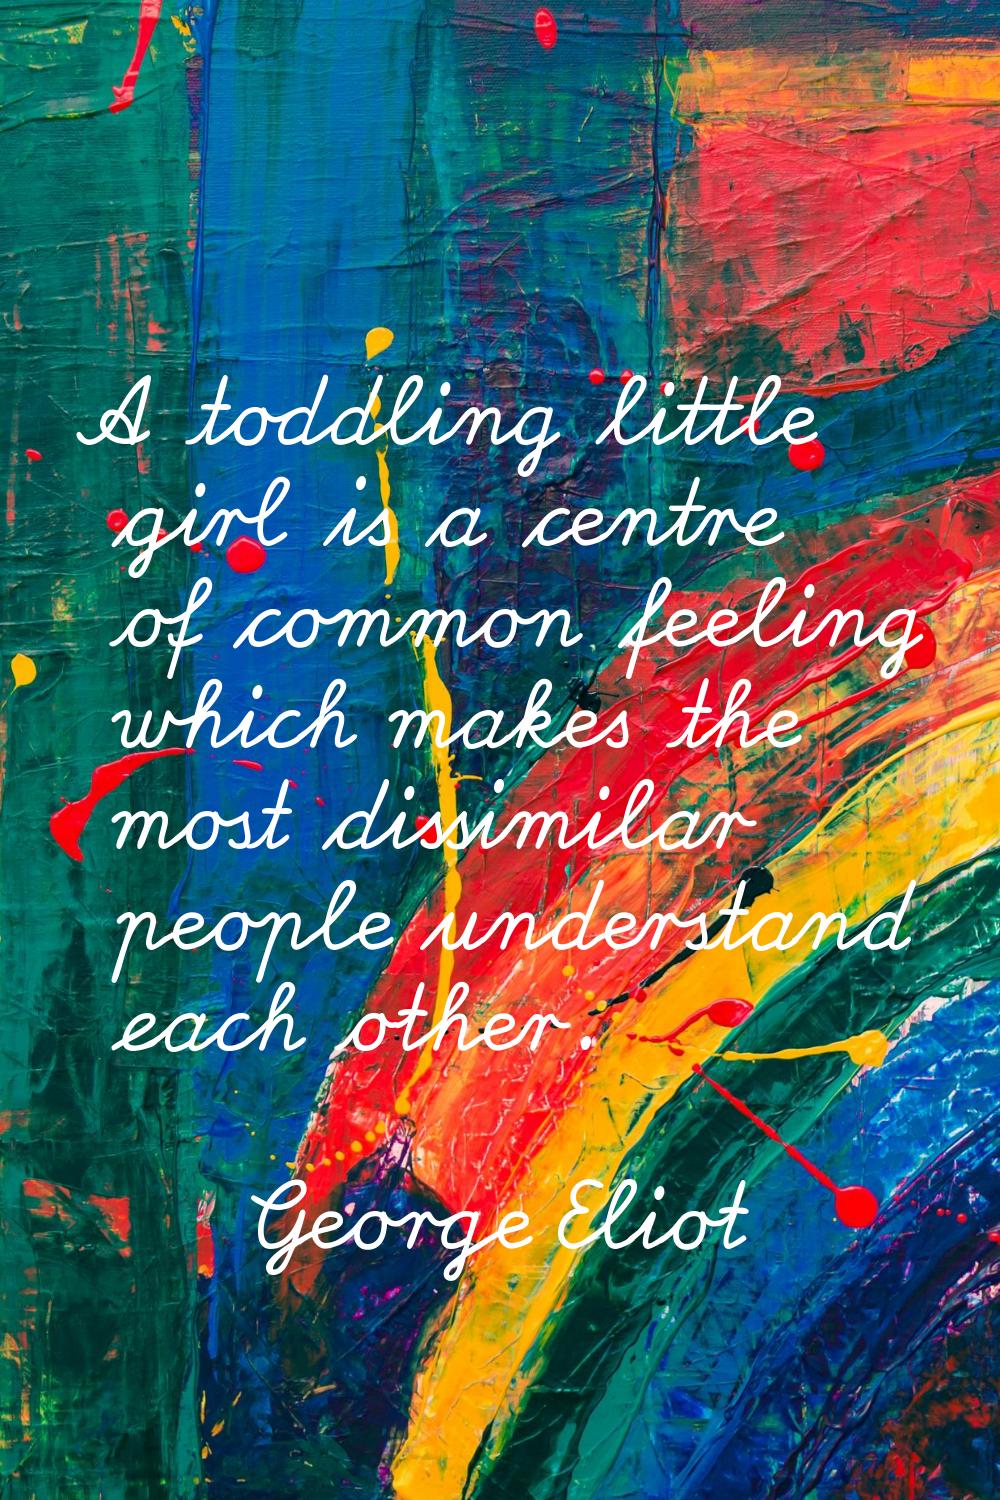 A toddling little girl is a centre of common feeling which makes the most dissimilar people underst